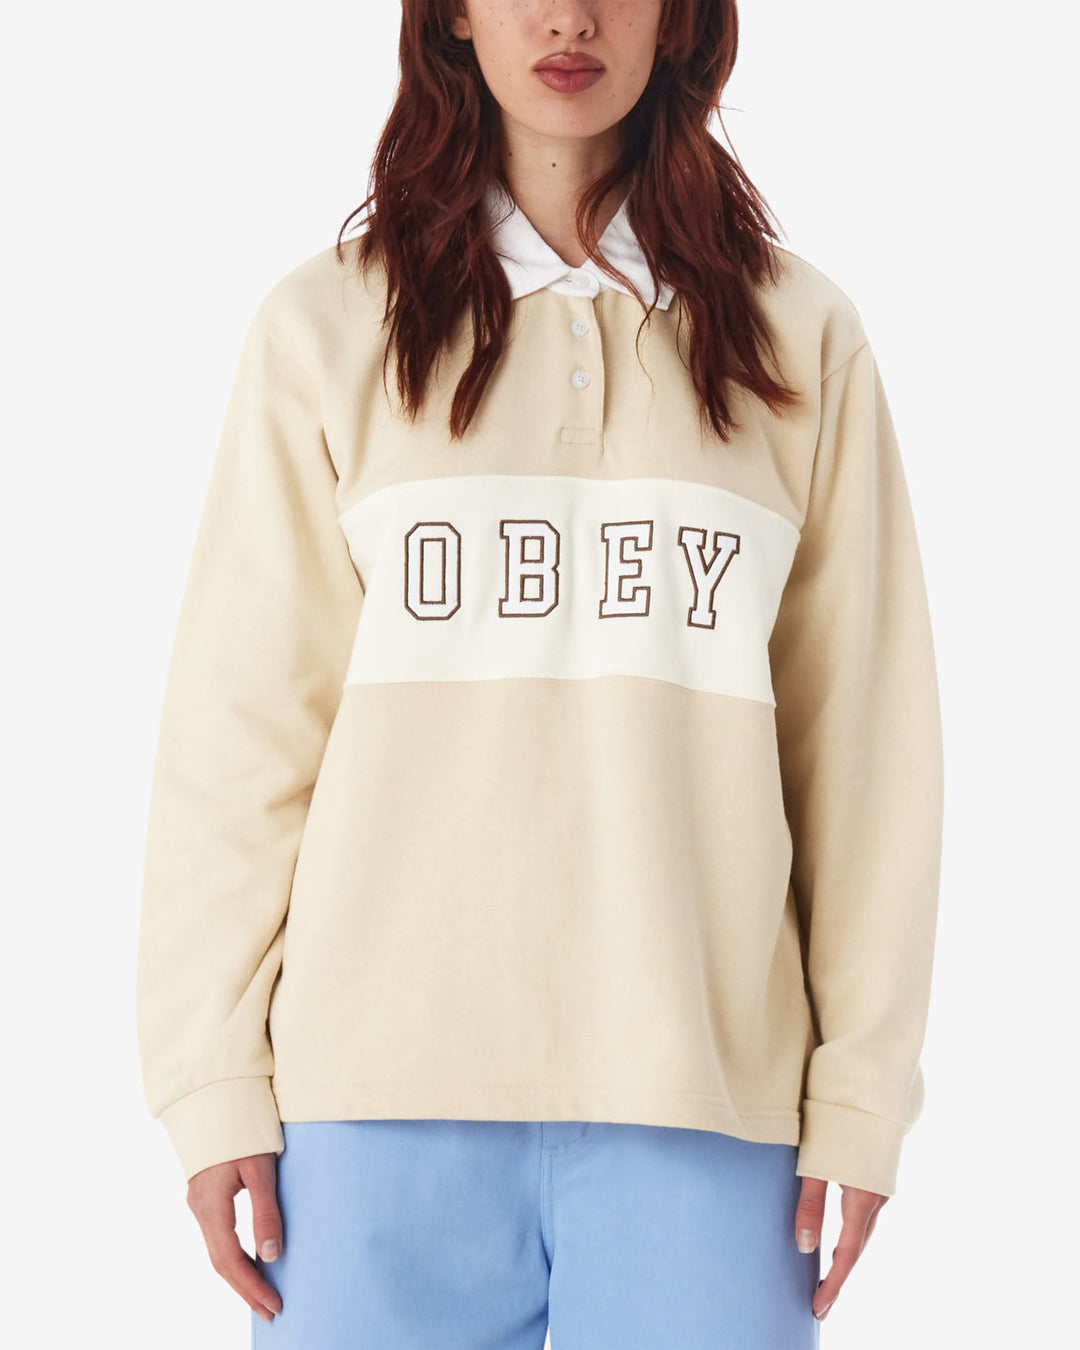 Obey Rosewood Rugby LS Polo - OYSTER GREY - Sun Diego Boardshop